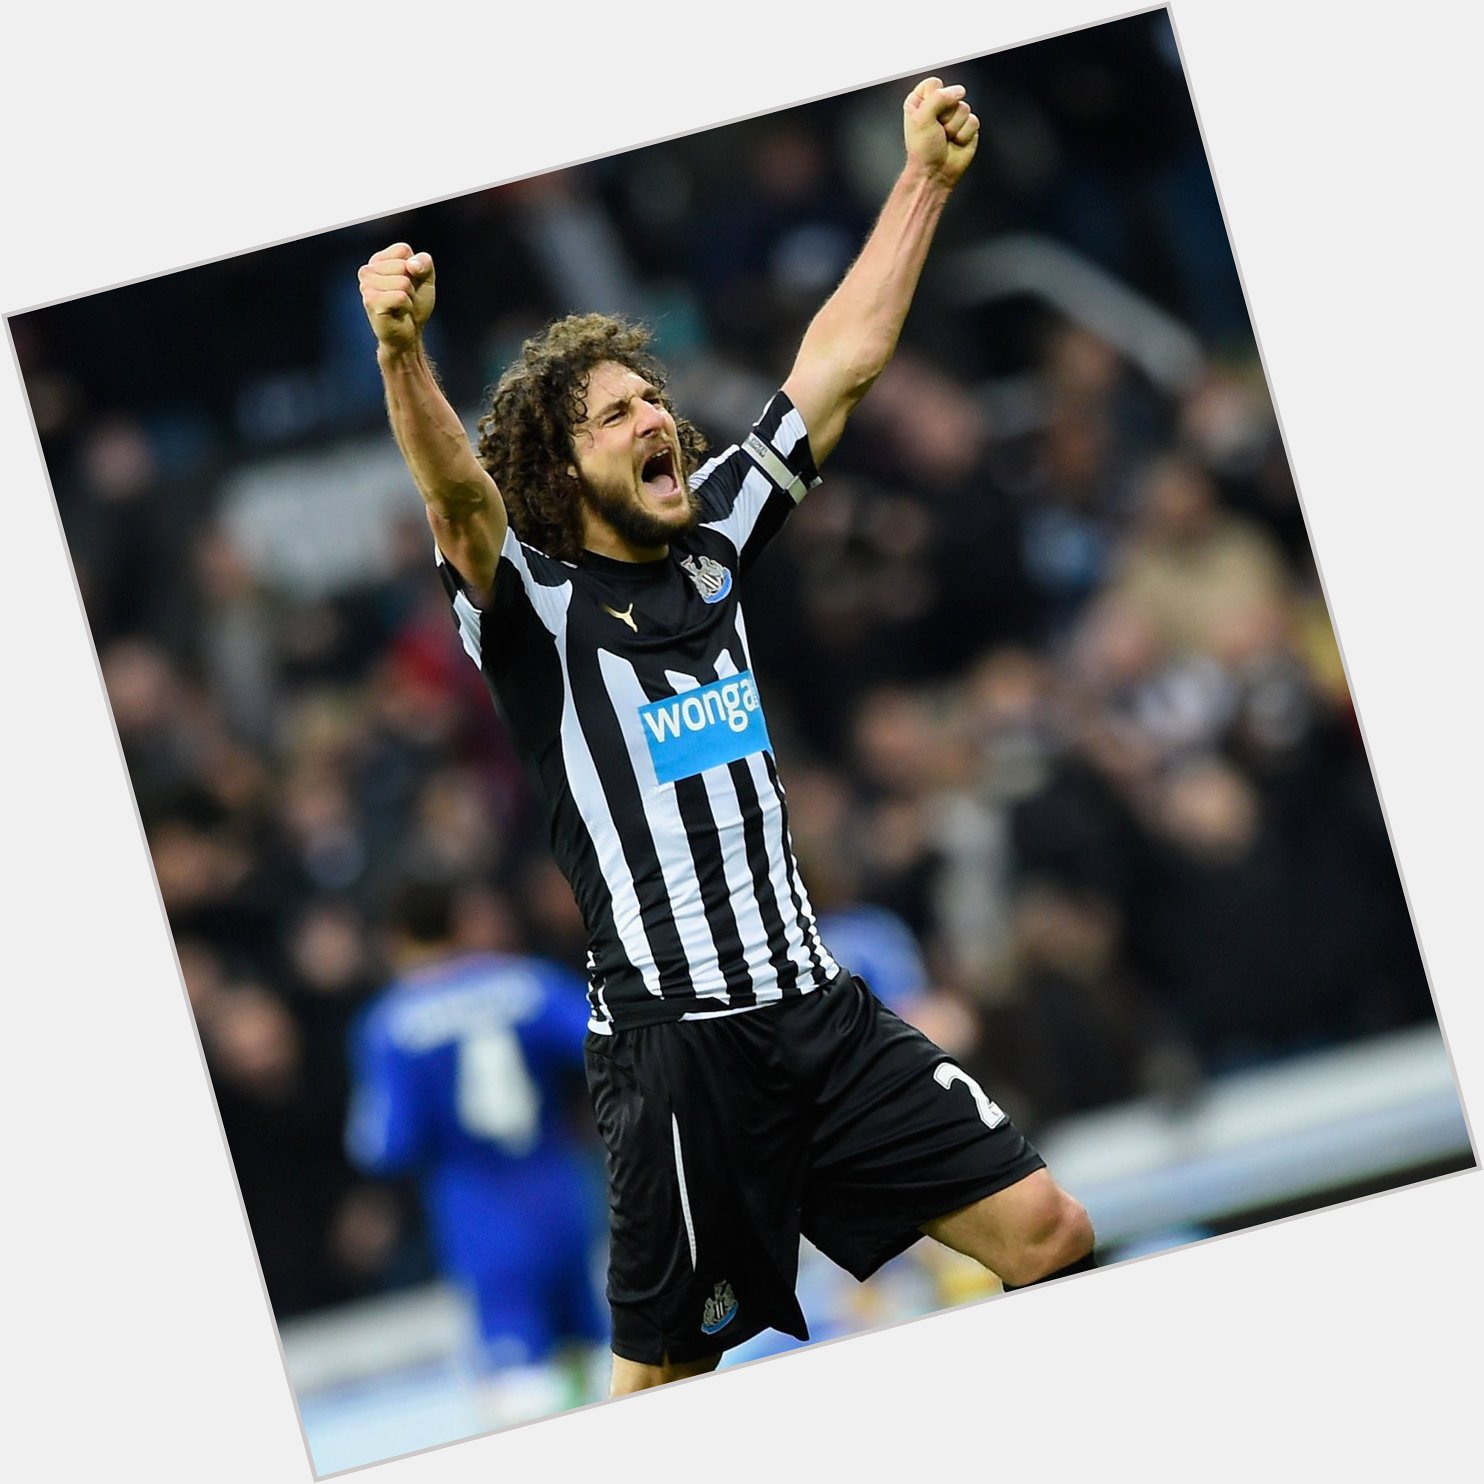 Happy birthday to the one and only Fabricio Coloccini! 